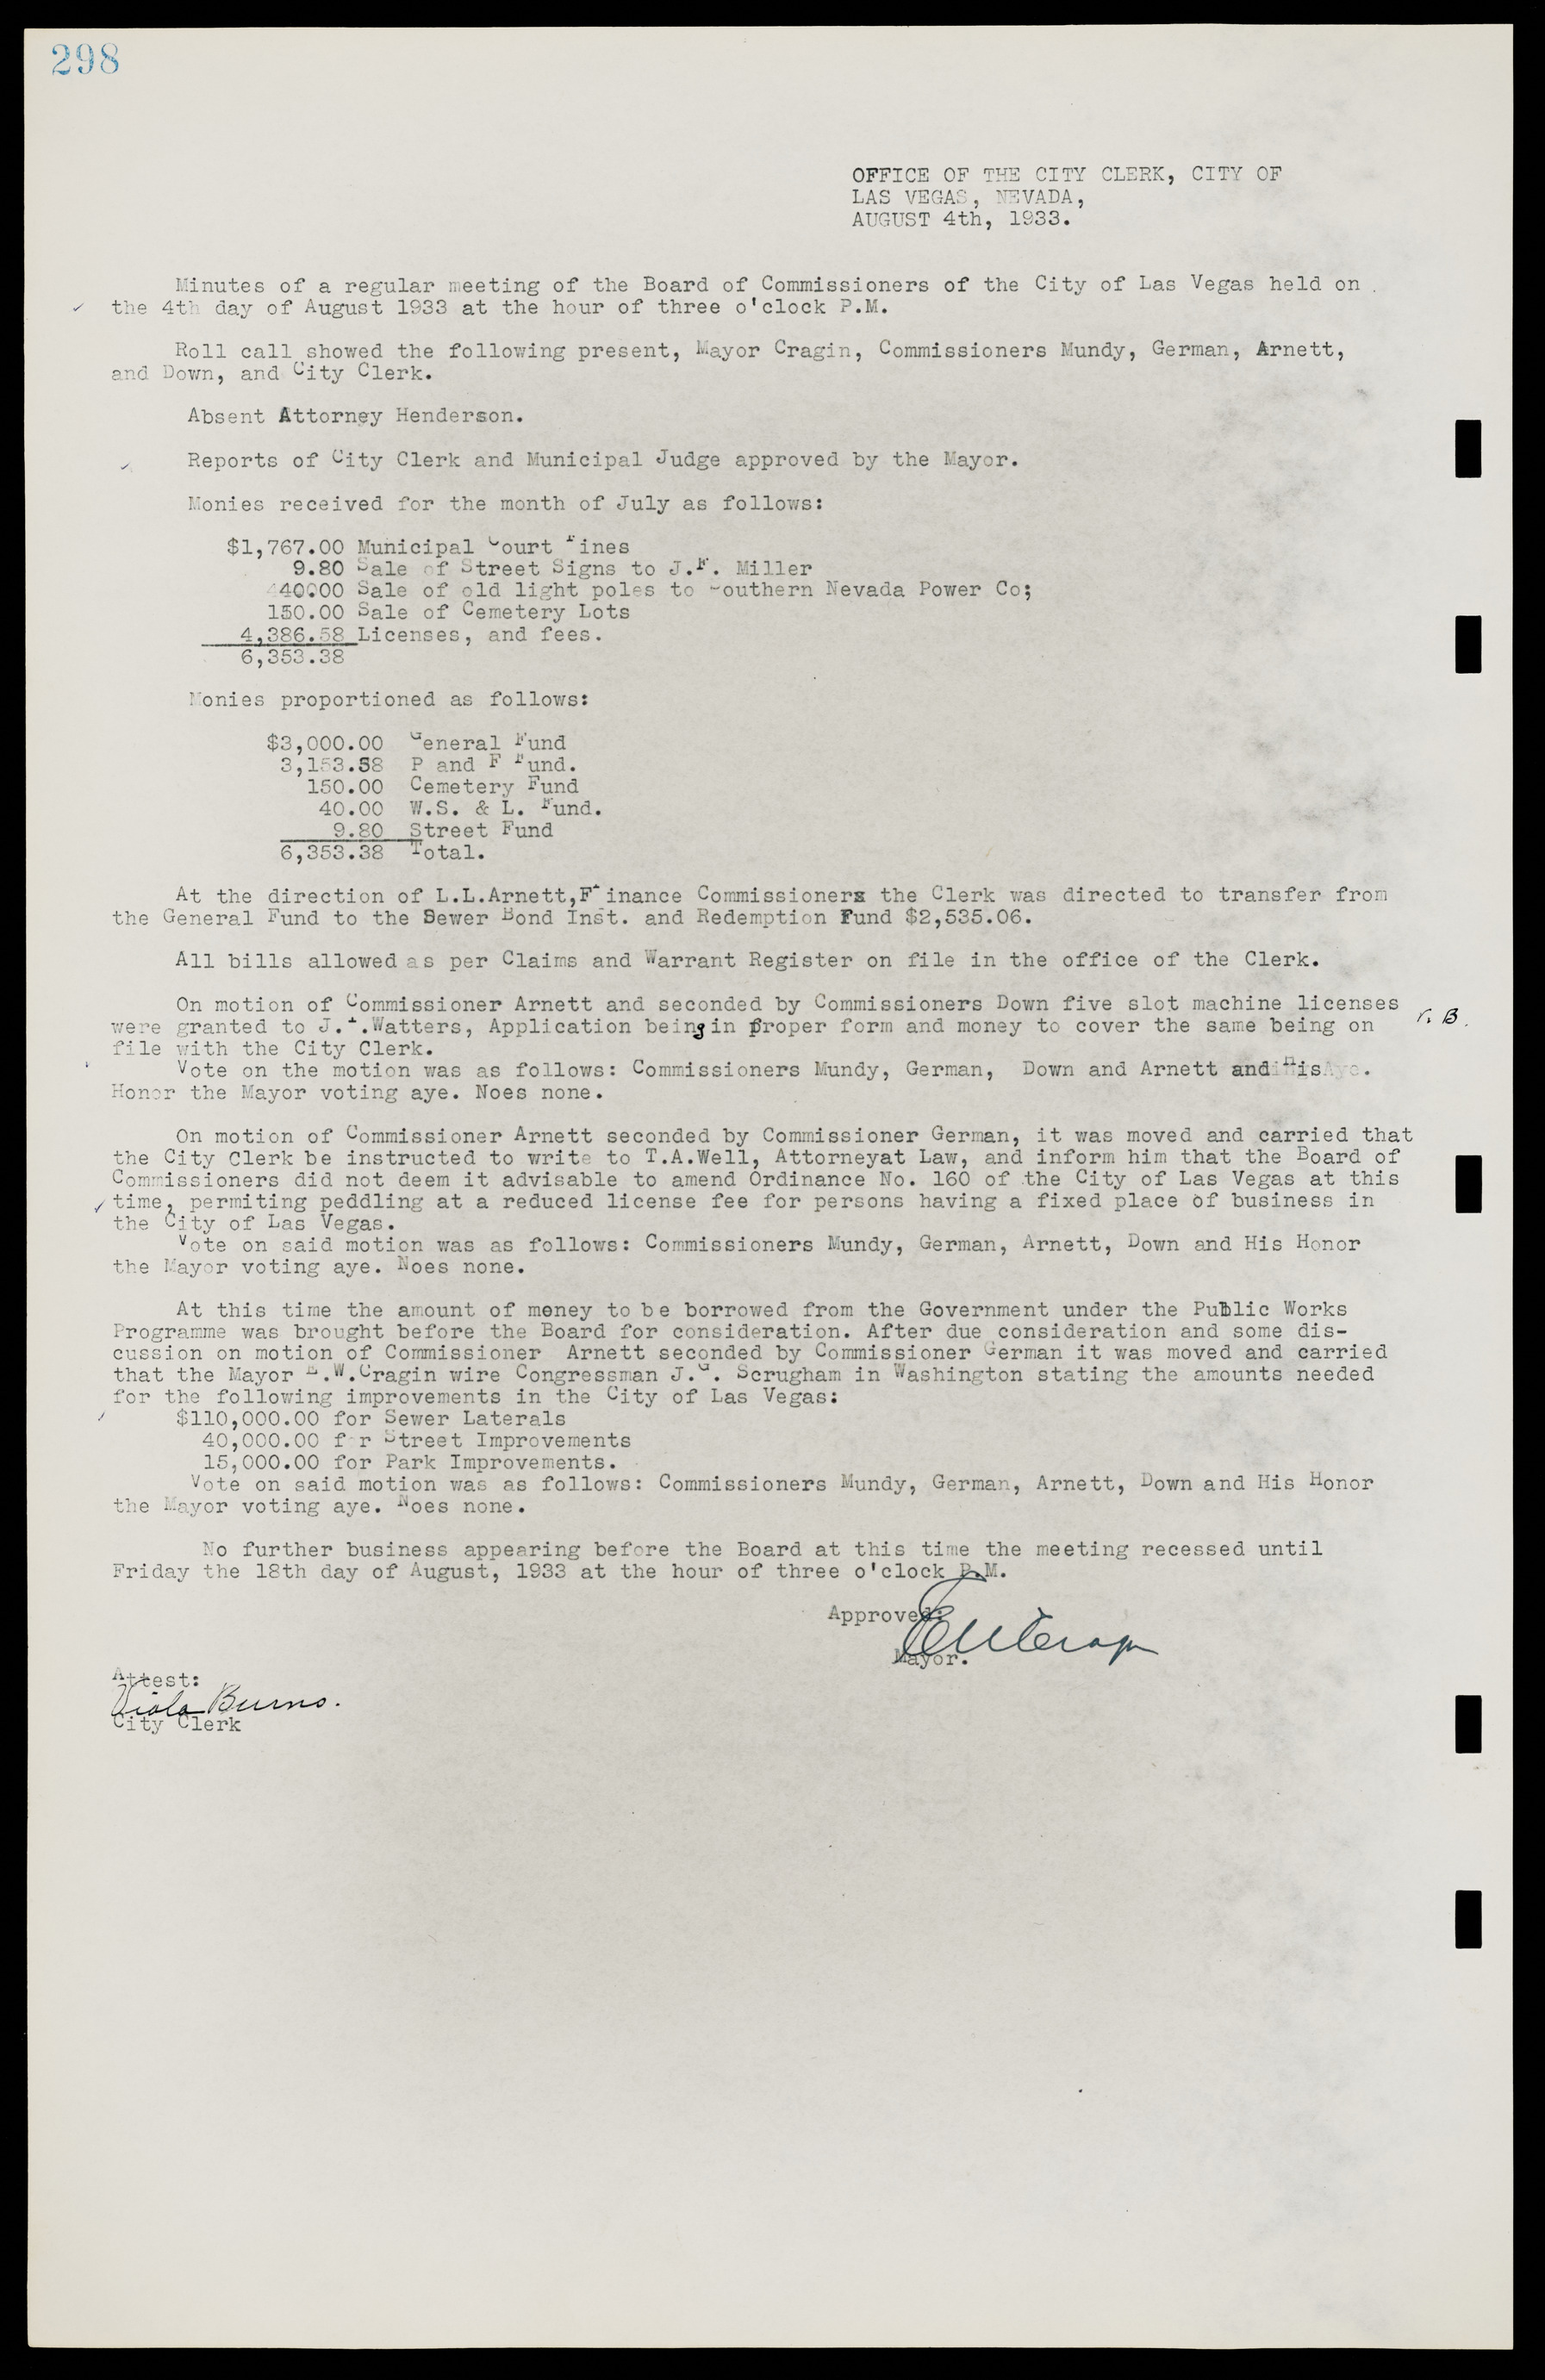 Las Vegas City Commission Minutes, May 14, 1929 to February 11, 1937, lvc000003-305